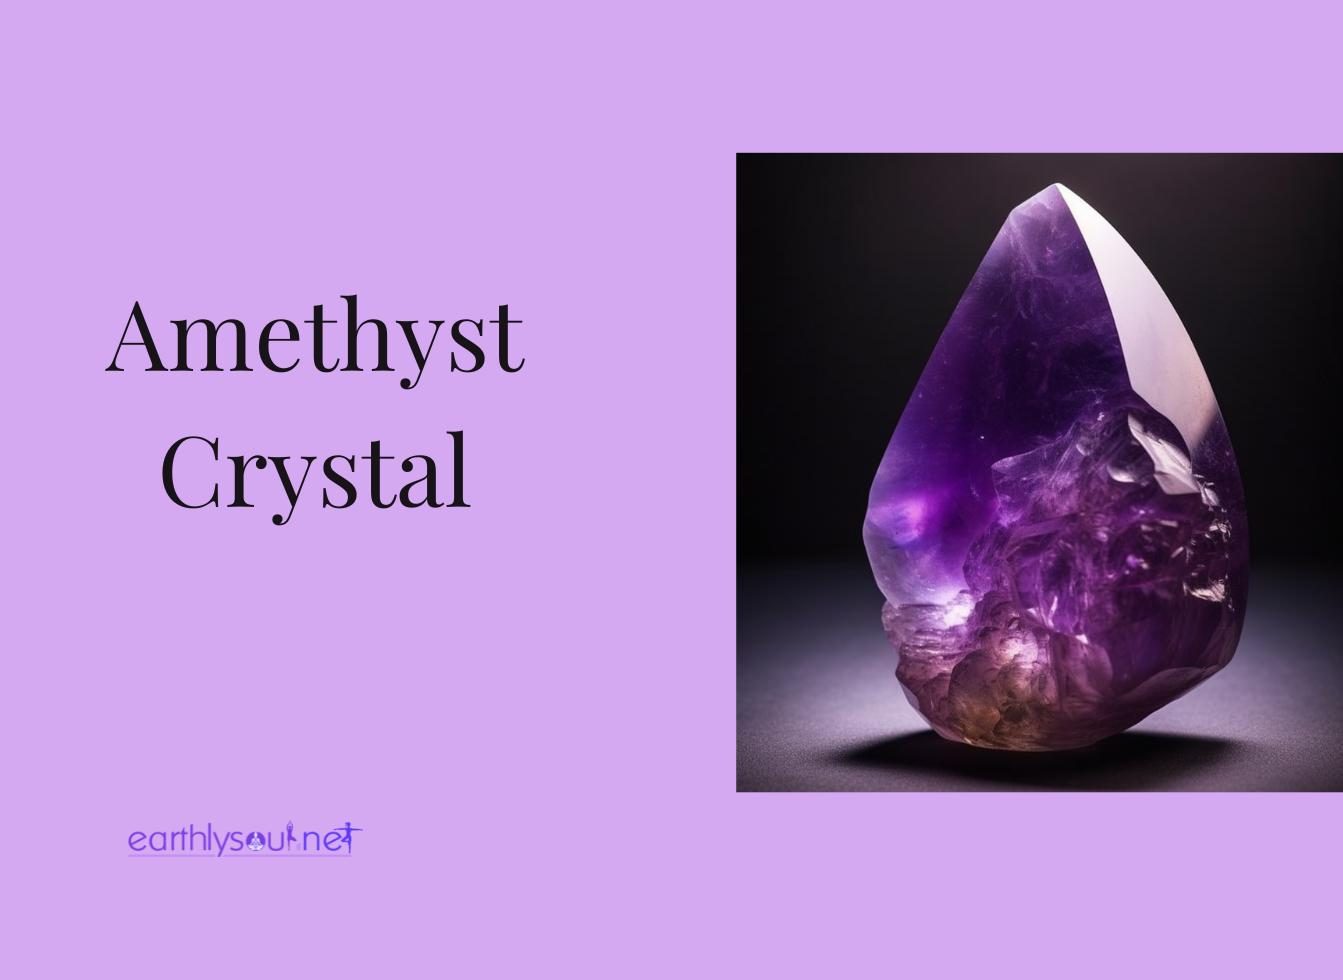 Amethyst crystal featured image